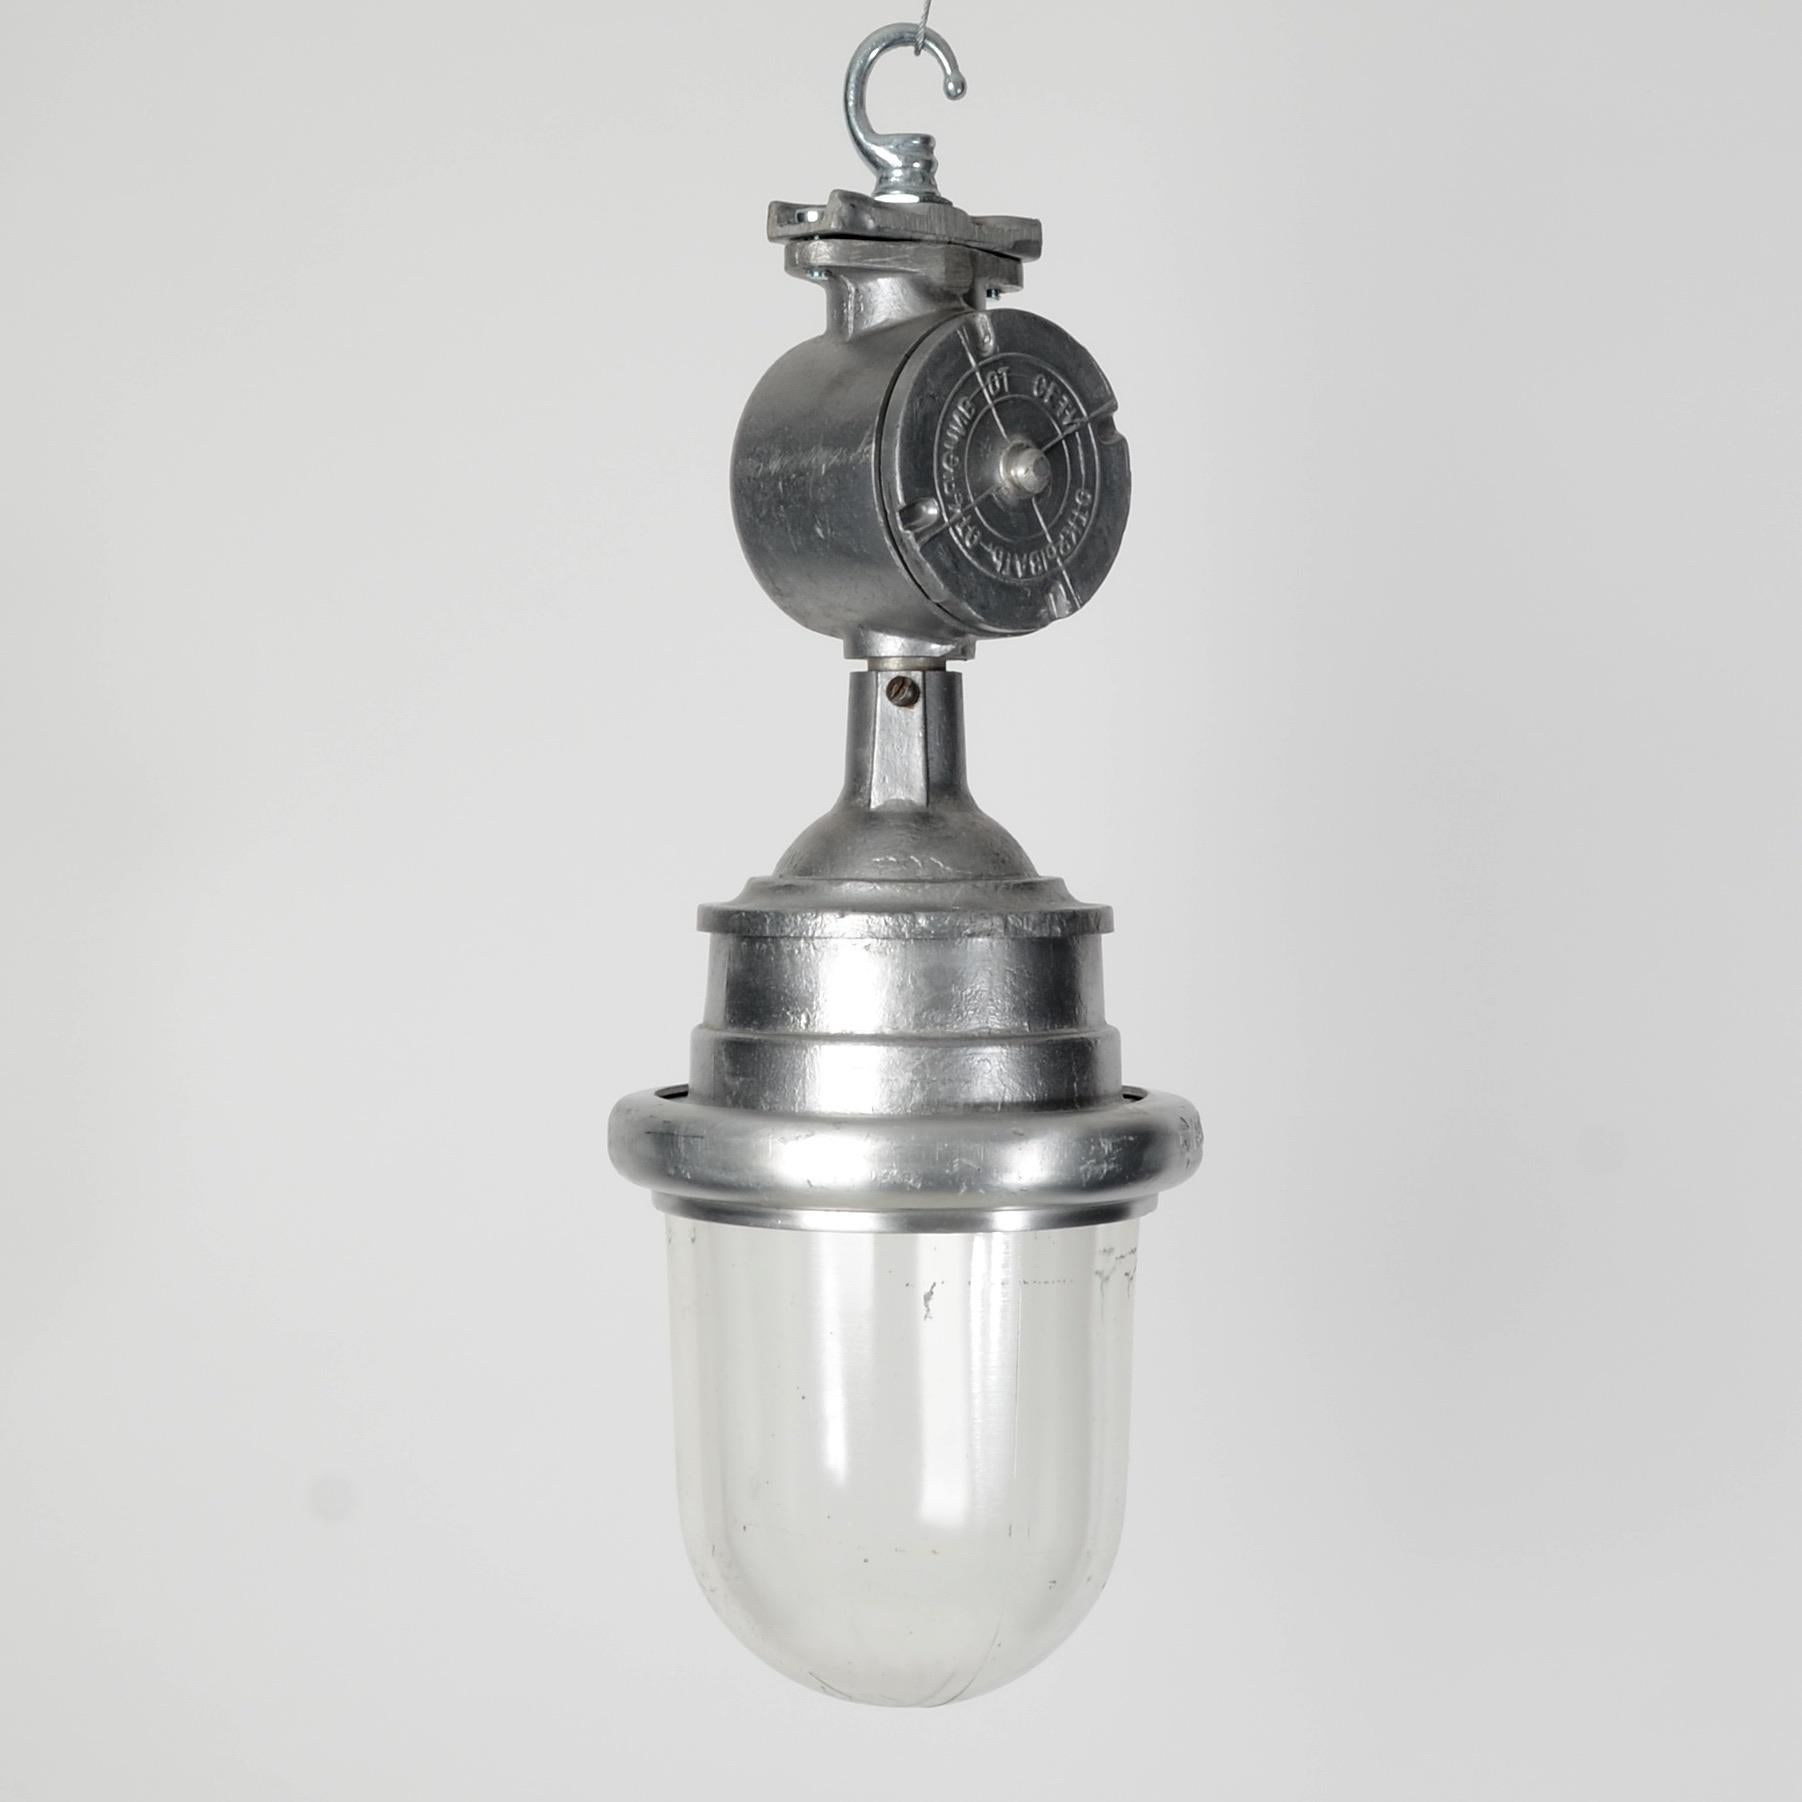 Vintage pendant lights from Mother Russia, reclaimed from a communist era factory. Original rough-cast aluminium gives these lights real industrial character.

Generally the lighting used throughout Russia in the communist period was of a very